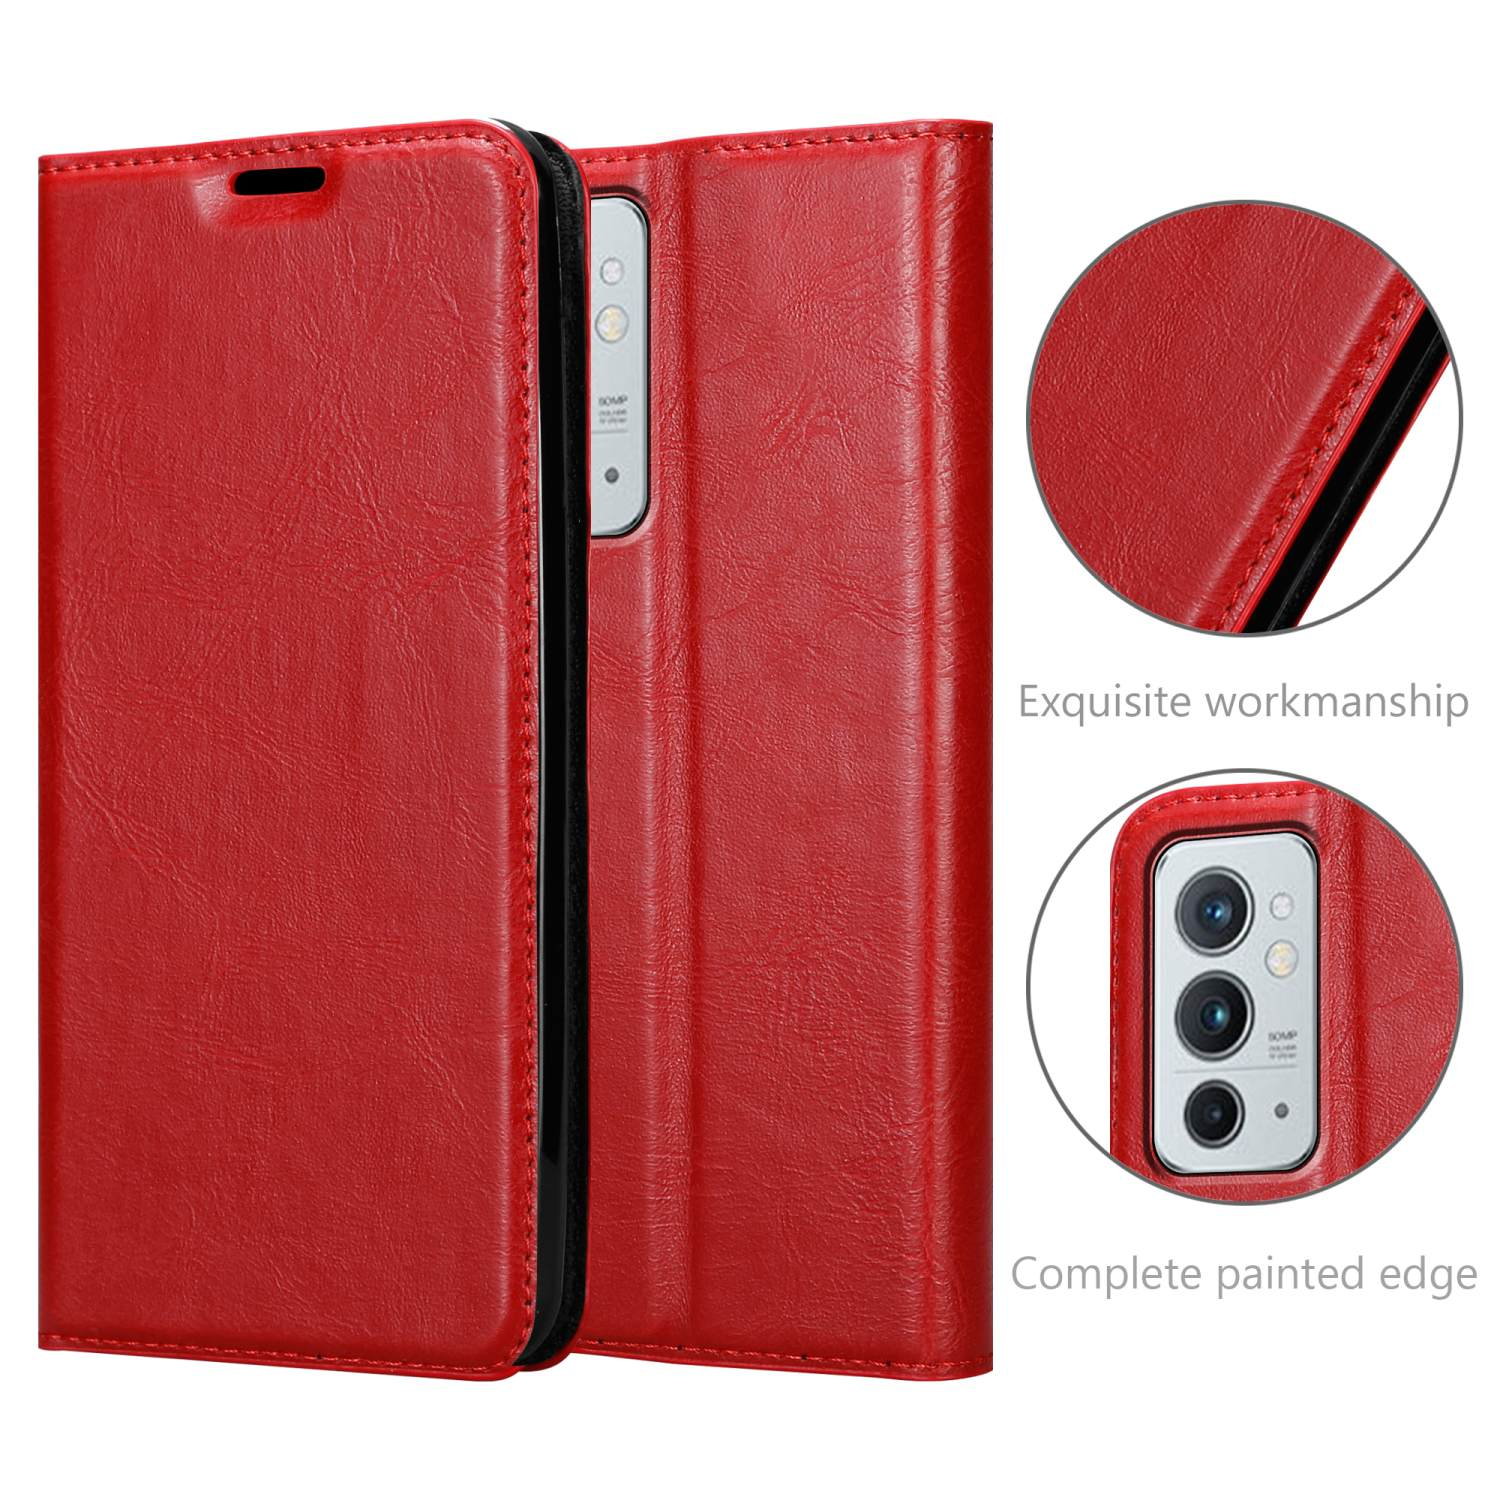 APFEL CADORABO Magnet, Book Bookcover, OnePlus, 5G, 9RT ROT Invisible Hülle